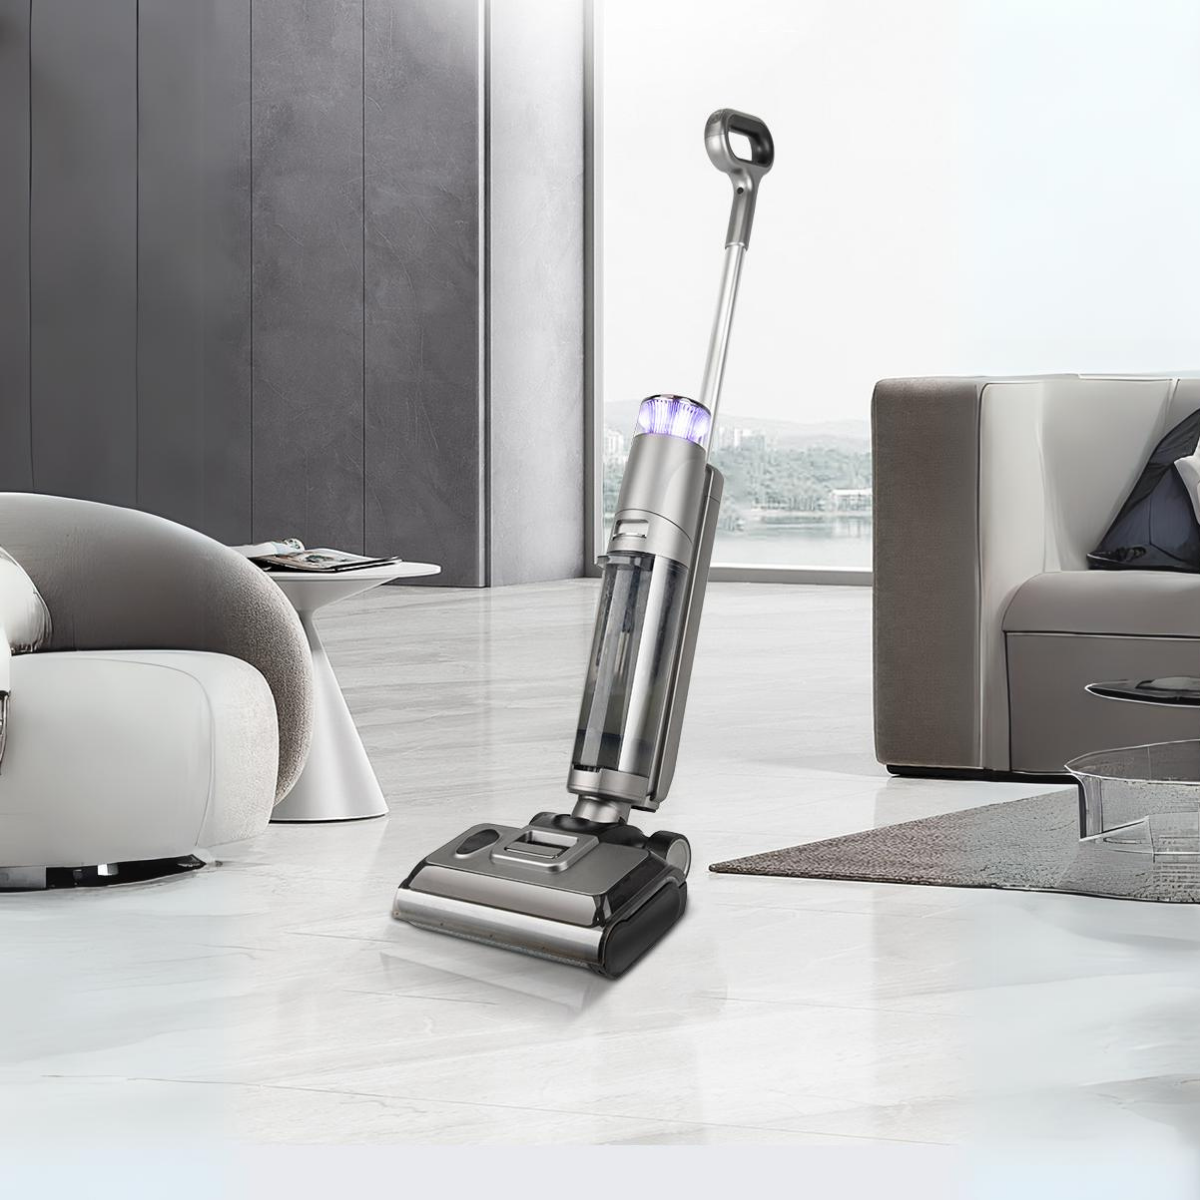 SA01 Cordless Wet Dry Vacuum & Mop for Hard Floors and  Short-pile Carpets, Self-clean and Dry